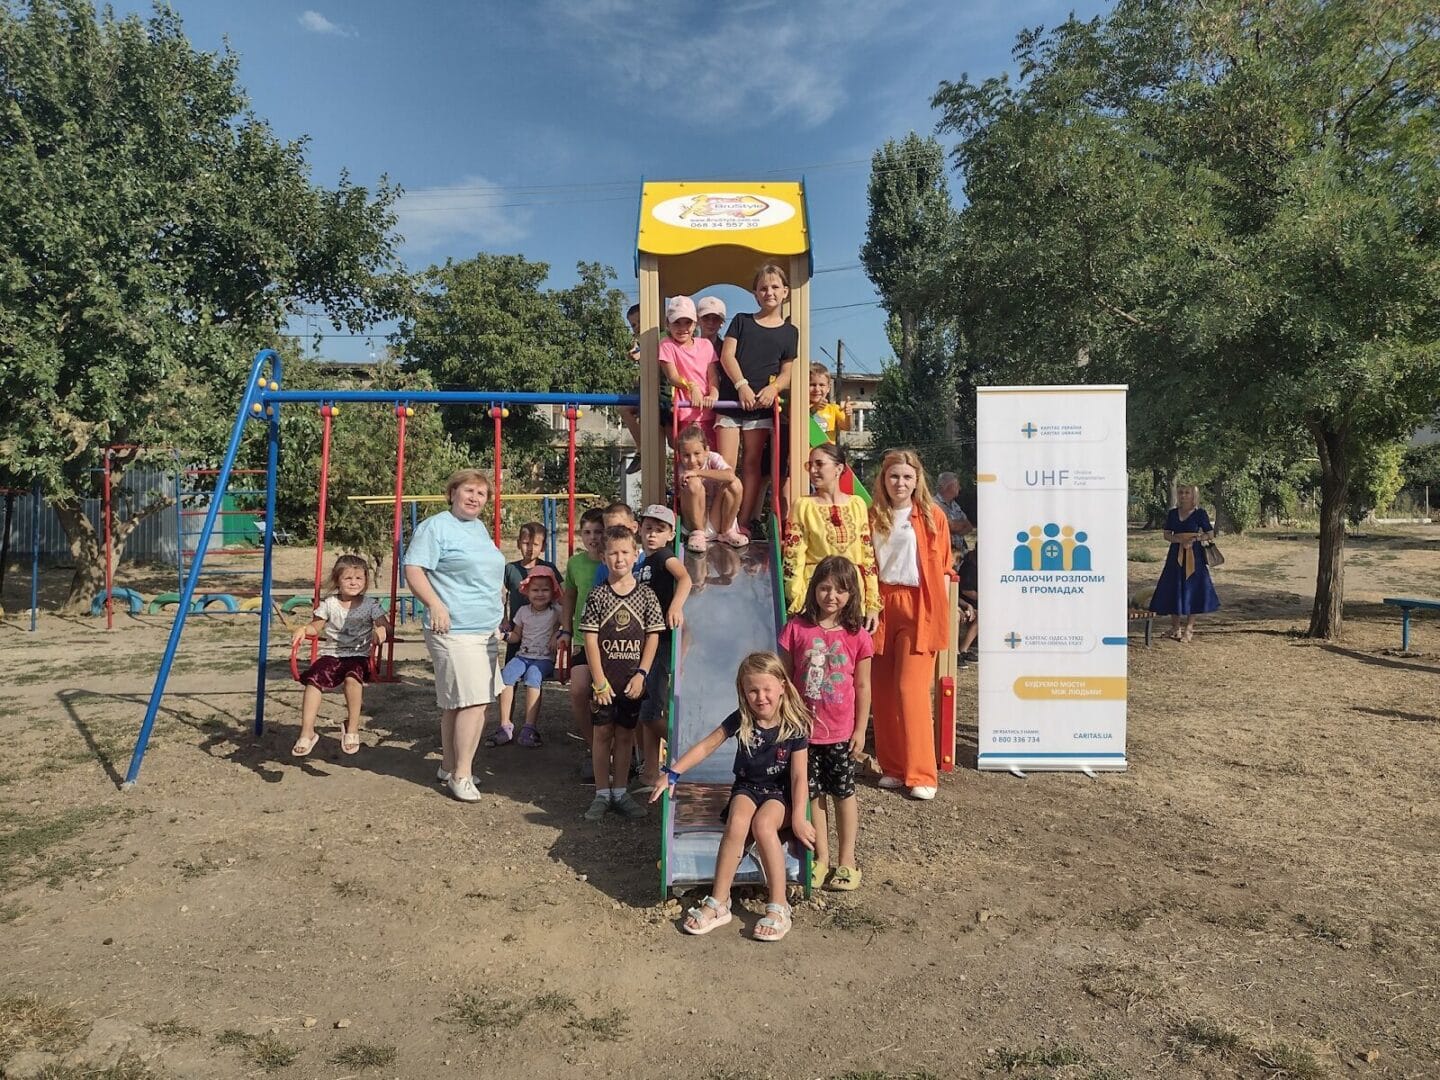 A children’s playground arranged under the project of Caritas Ukraine: “Happy group in unity of affairs – Krasnosilka today”